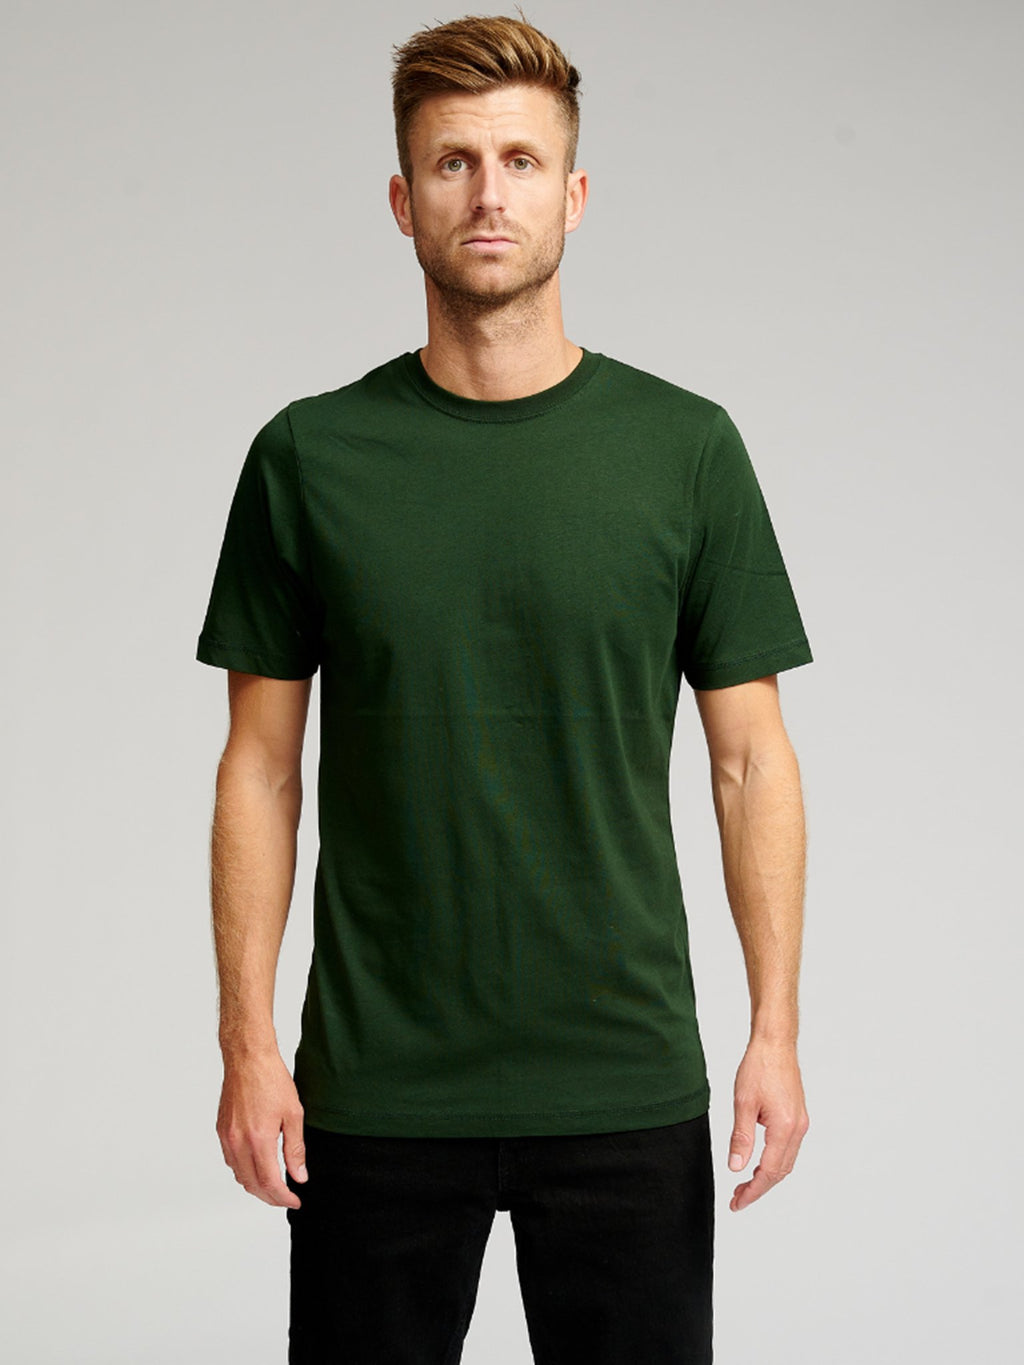 Organic Basic T-Shirts – Package Deal 9 pcs. (email)